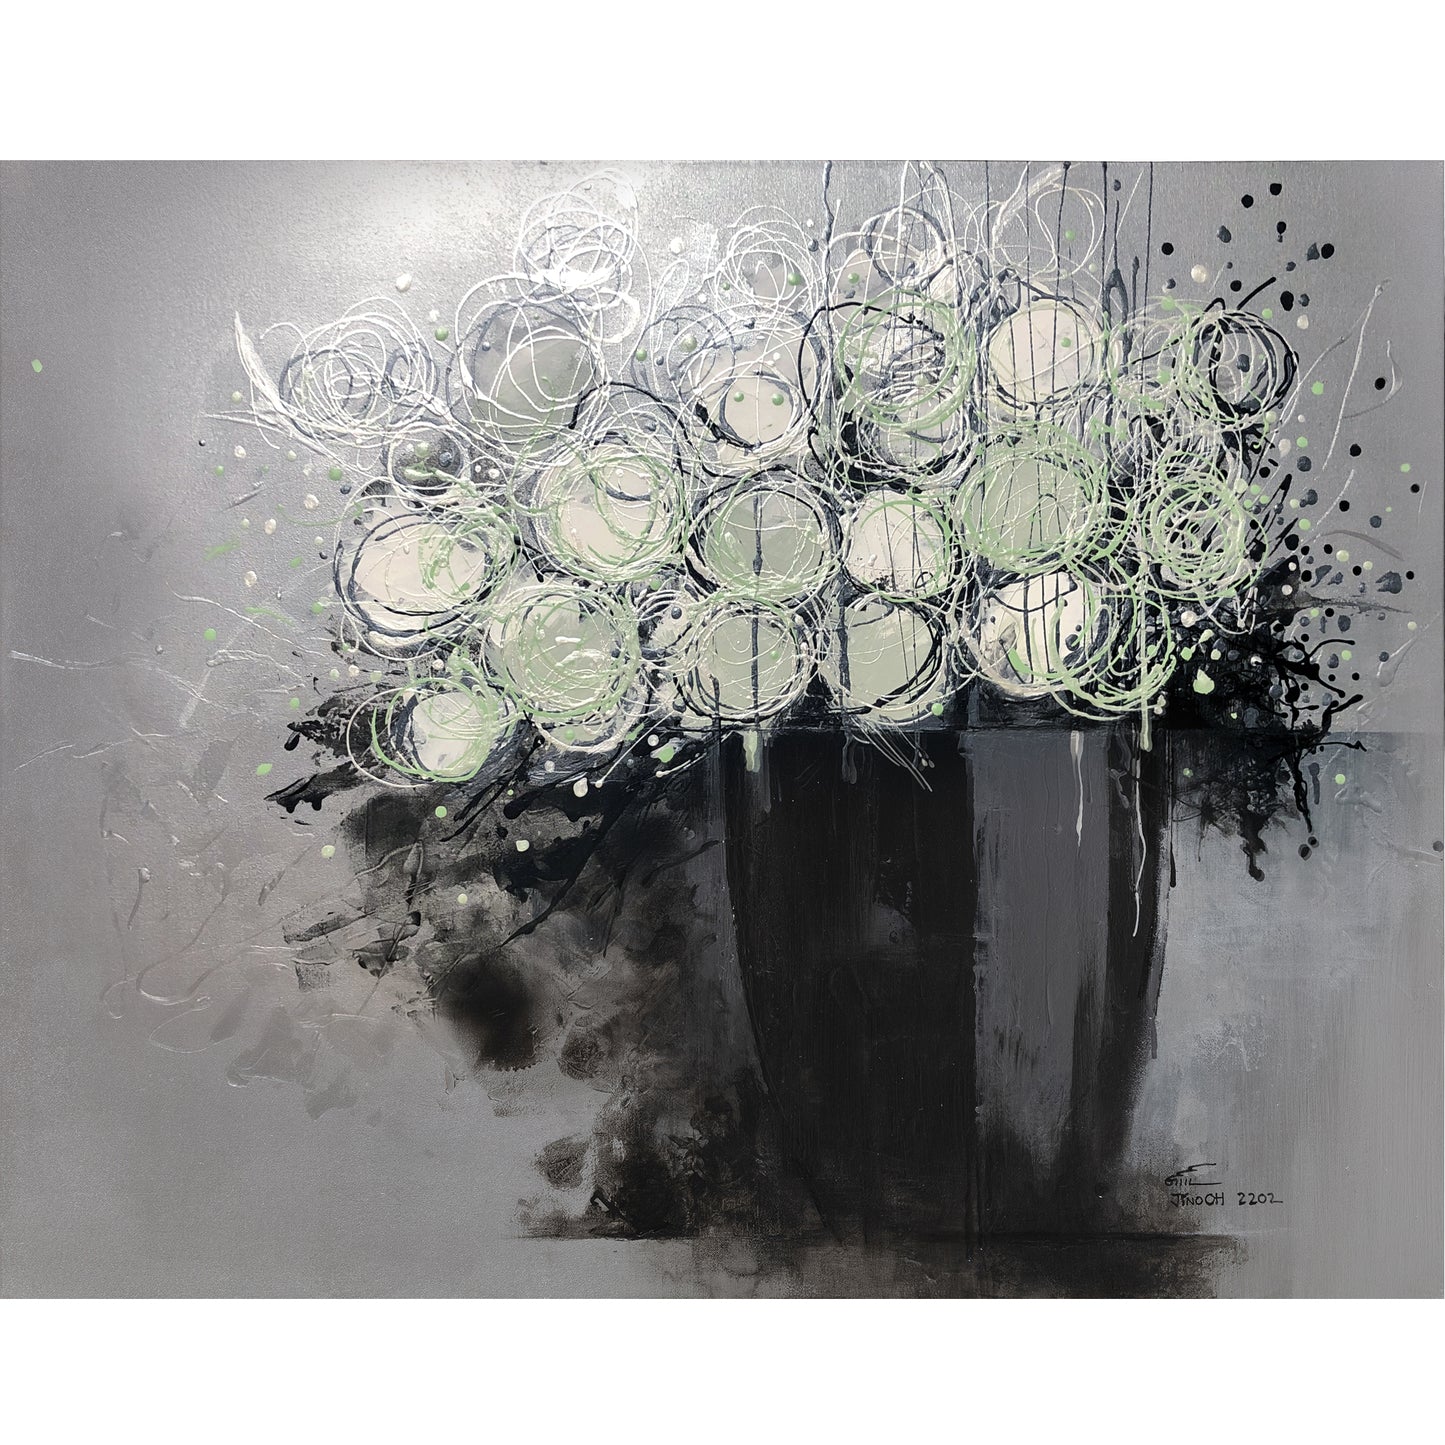 Metallic Black, White and Silver Floral Abstract Art JA044